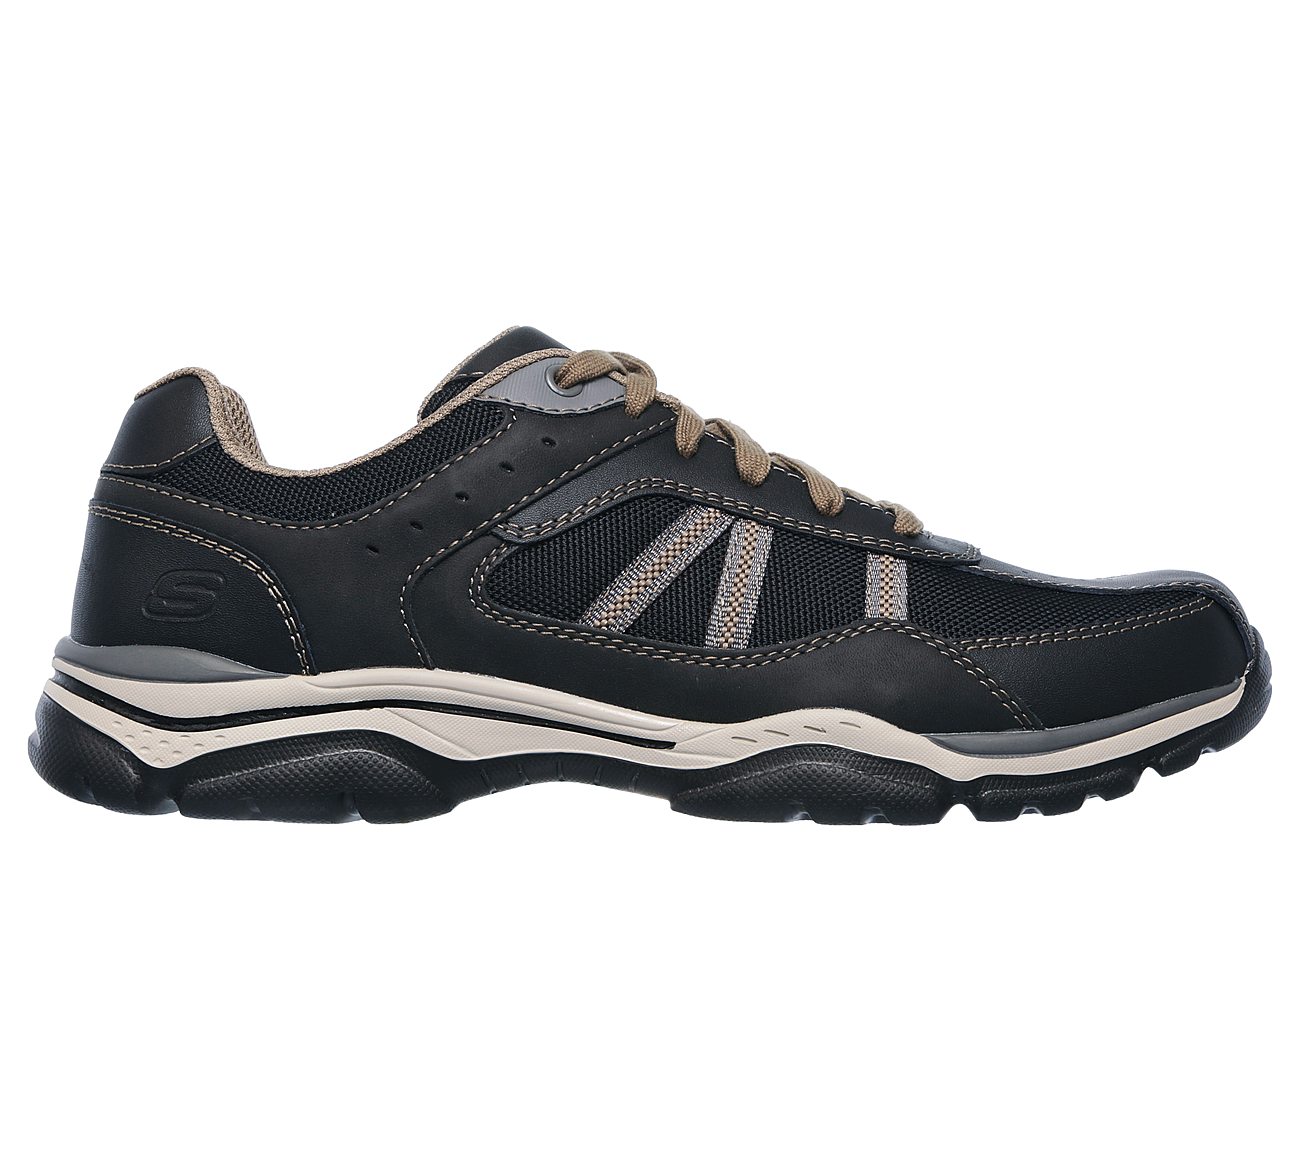 Buy SKECHERS Relaxed Fit: Rovato - Soloven Relaxed Fit Shoes only $46.00